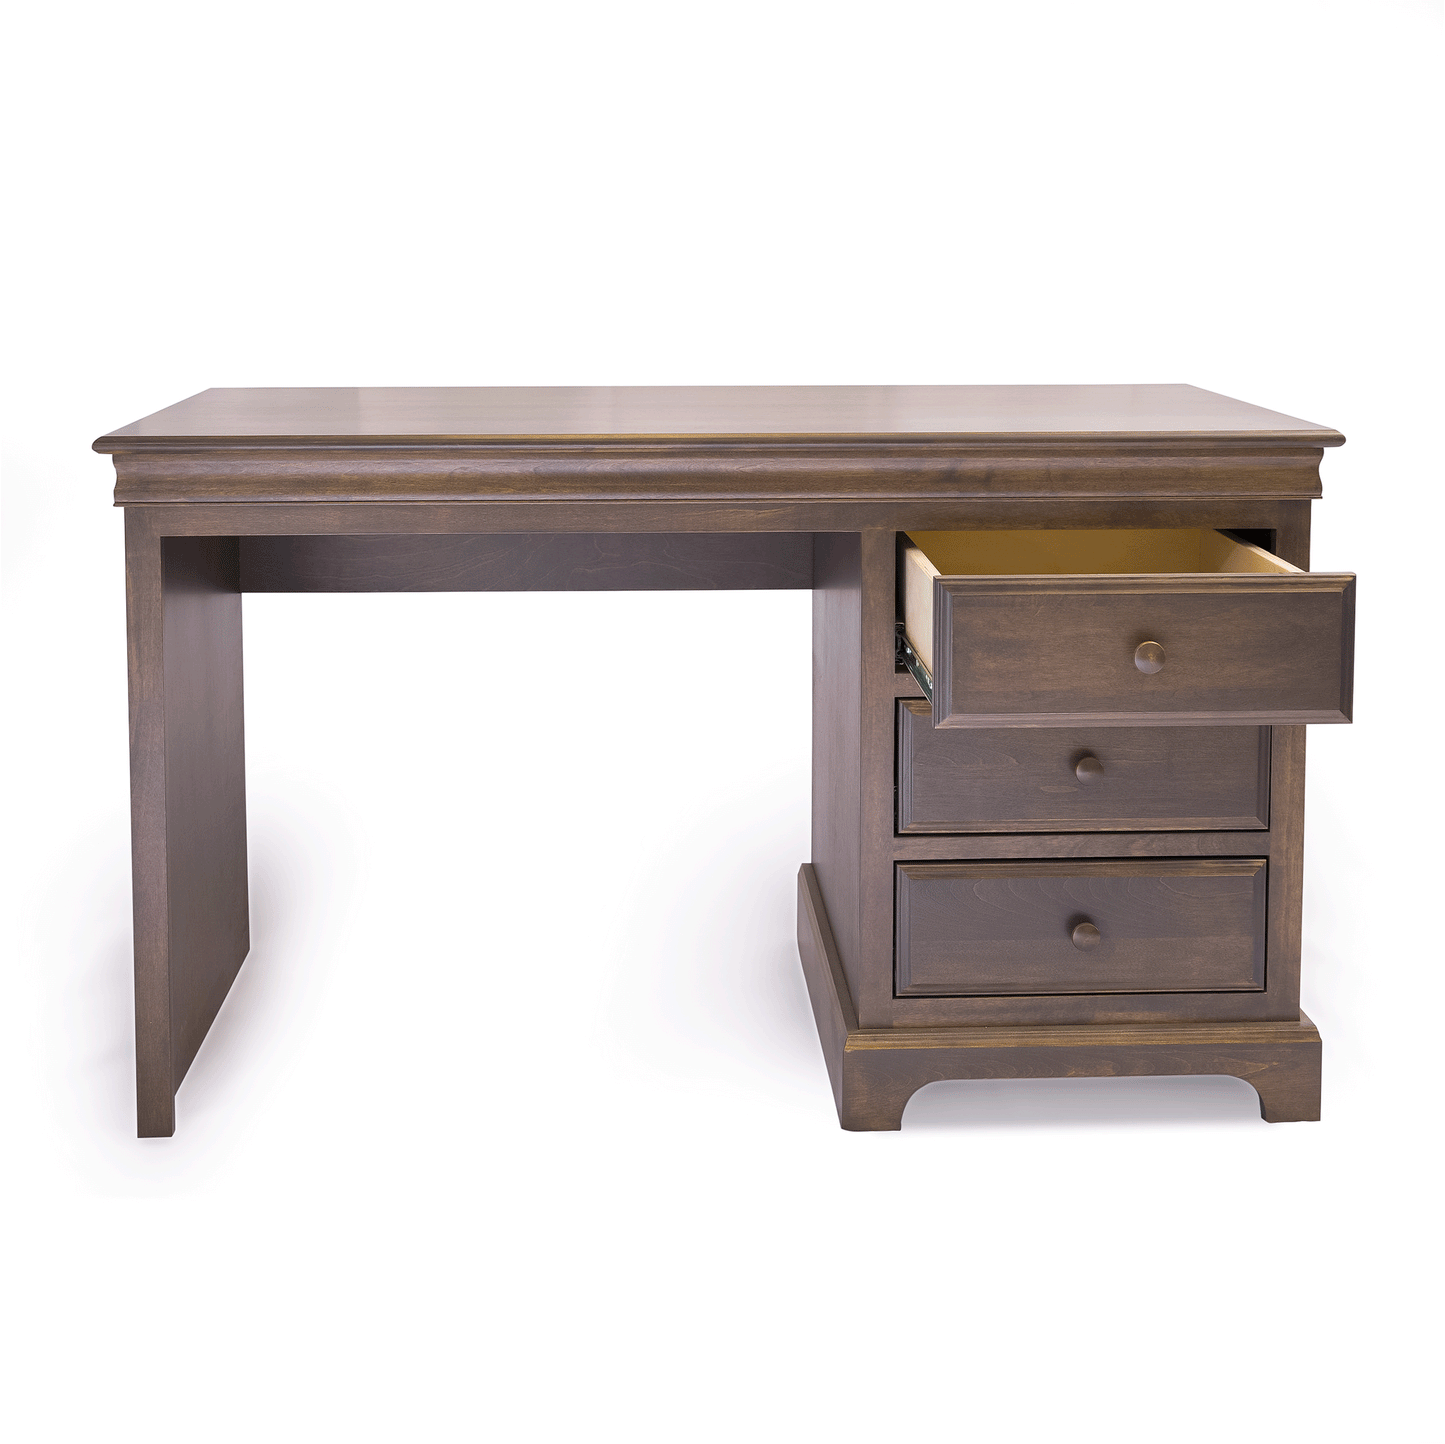 Acadia Madison Student Desk shown with each drawer open to highlight storage.